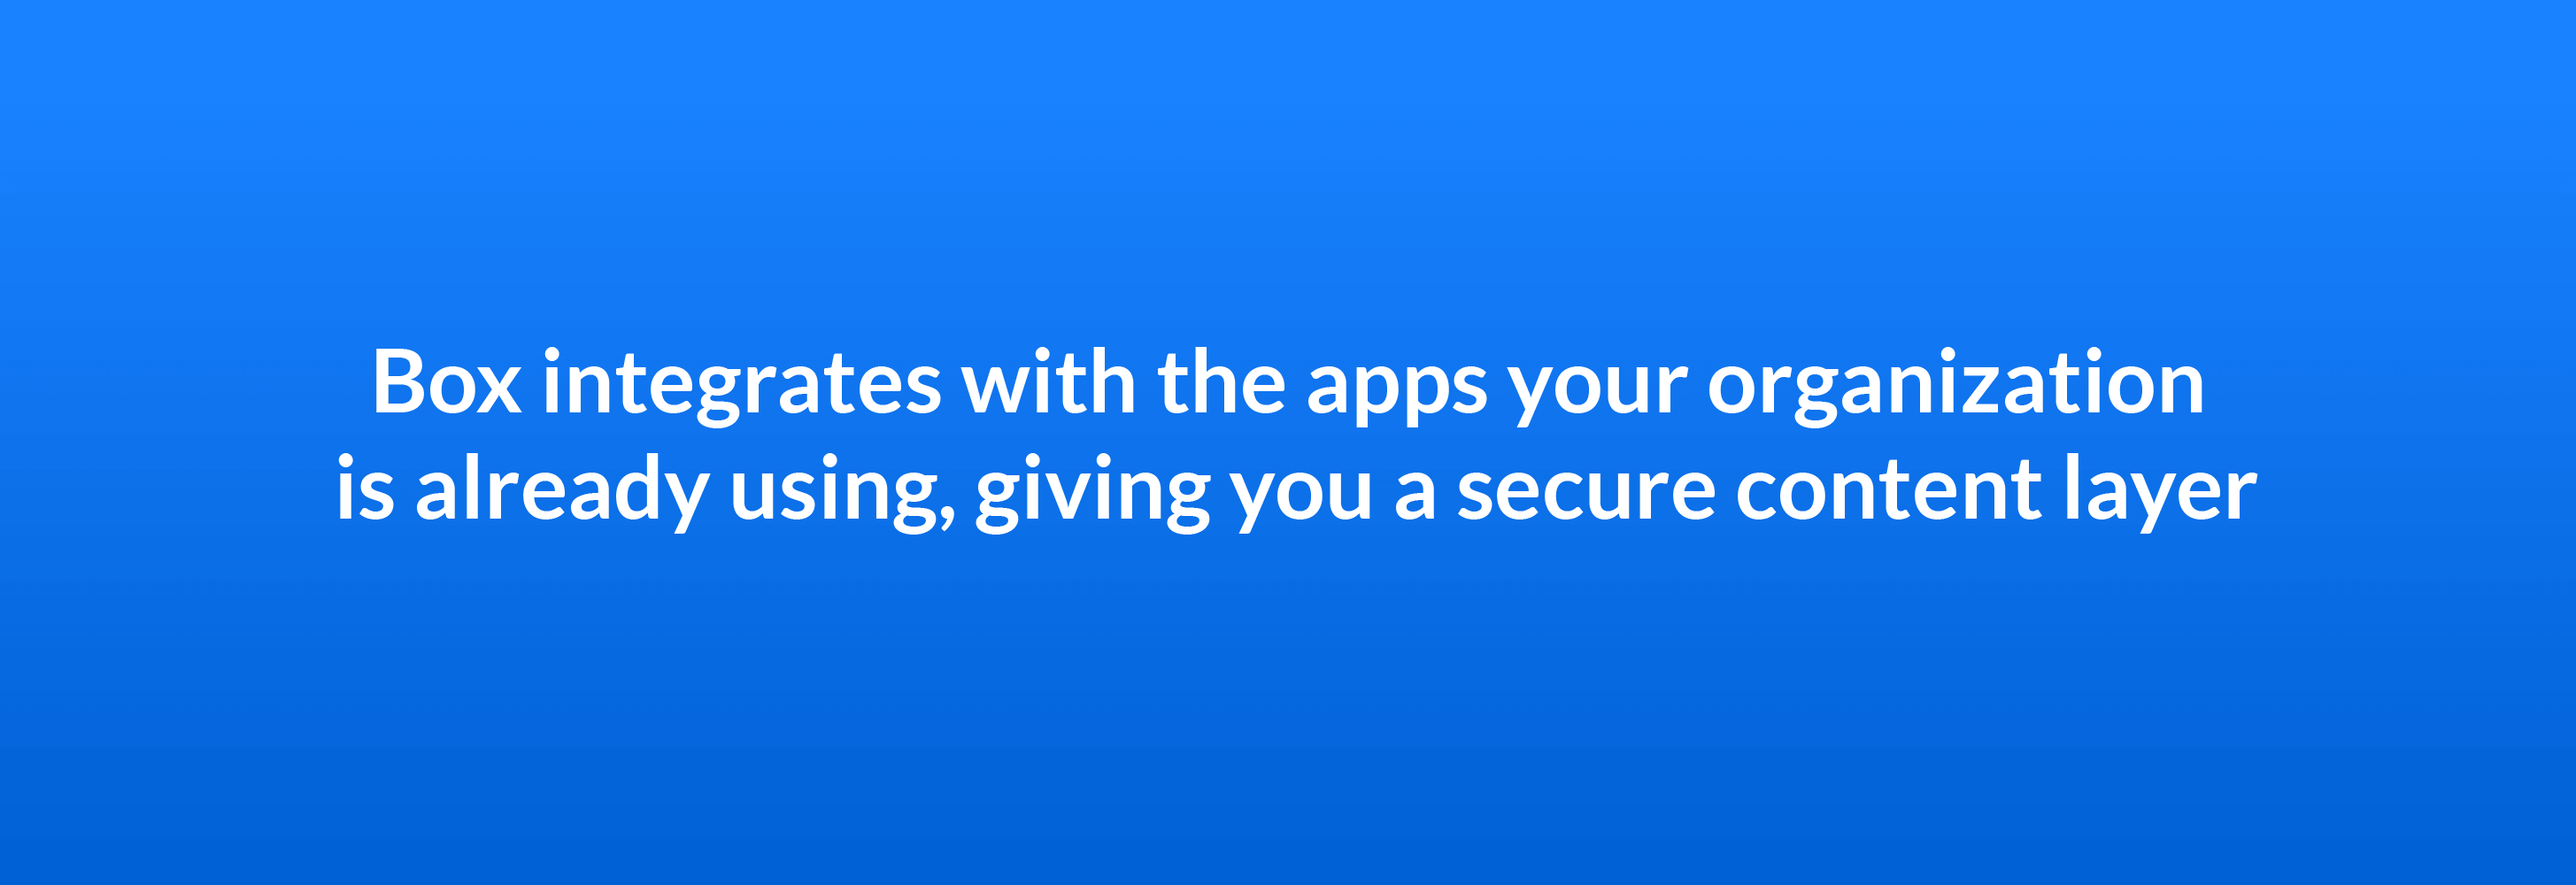 Box integrates with the apps your organization is already using giving you a secure content layer